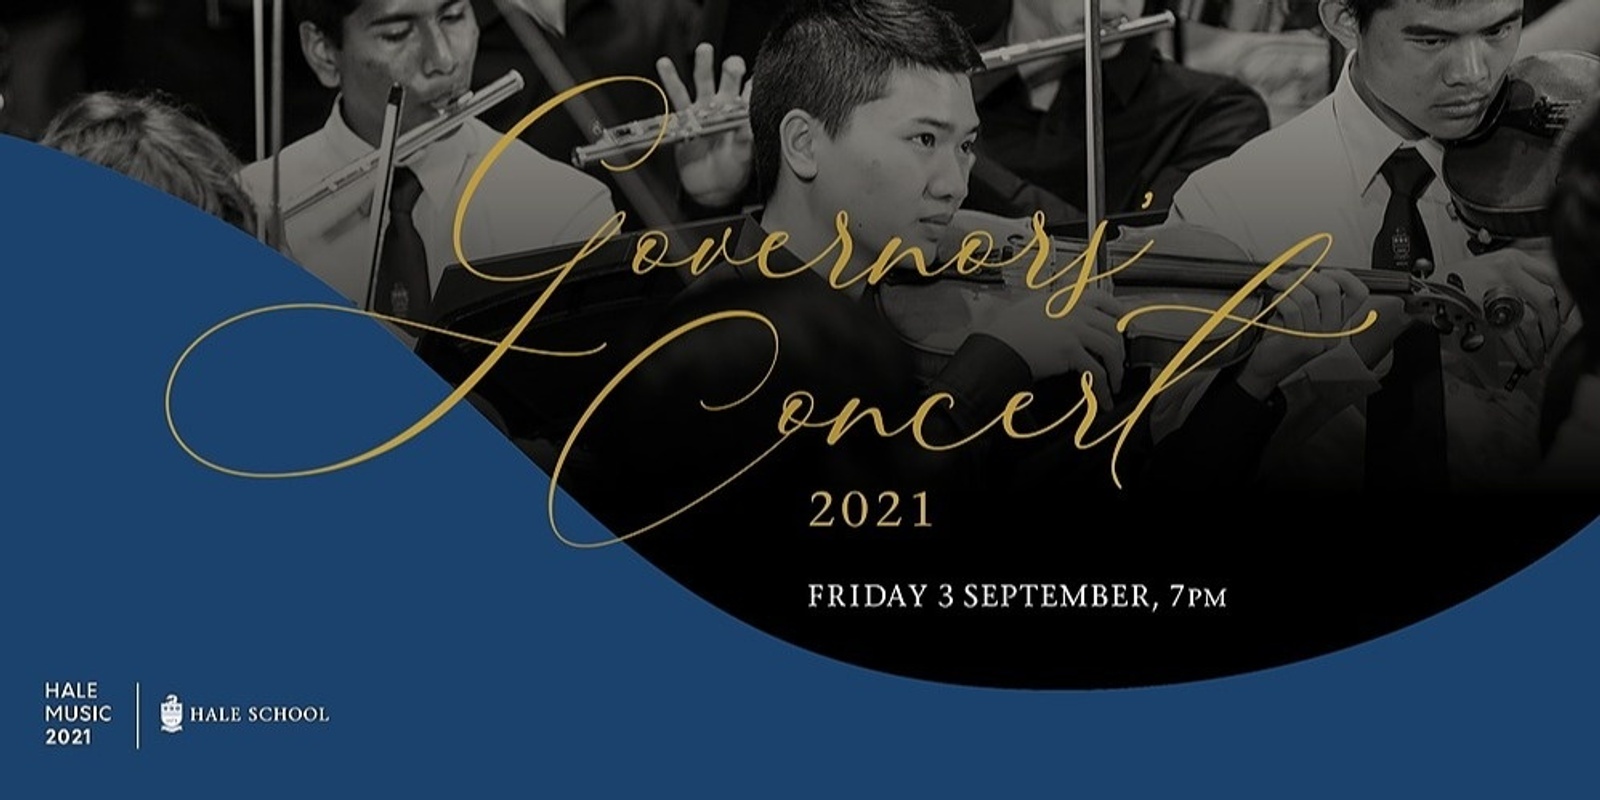 Banner image for 2021 Governors Concert